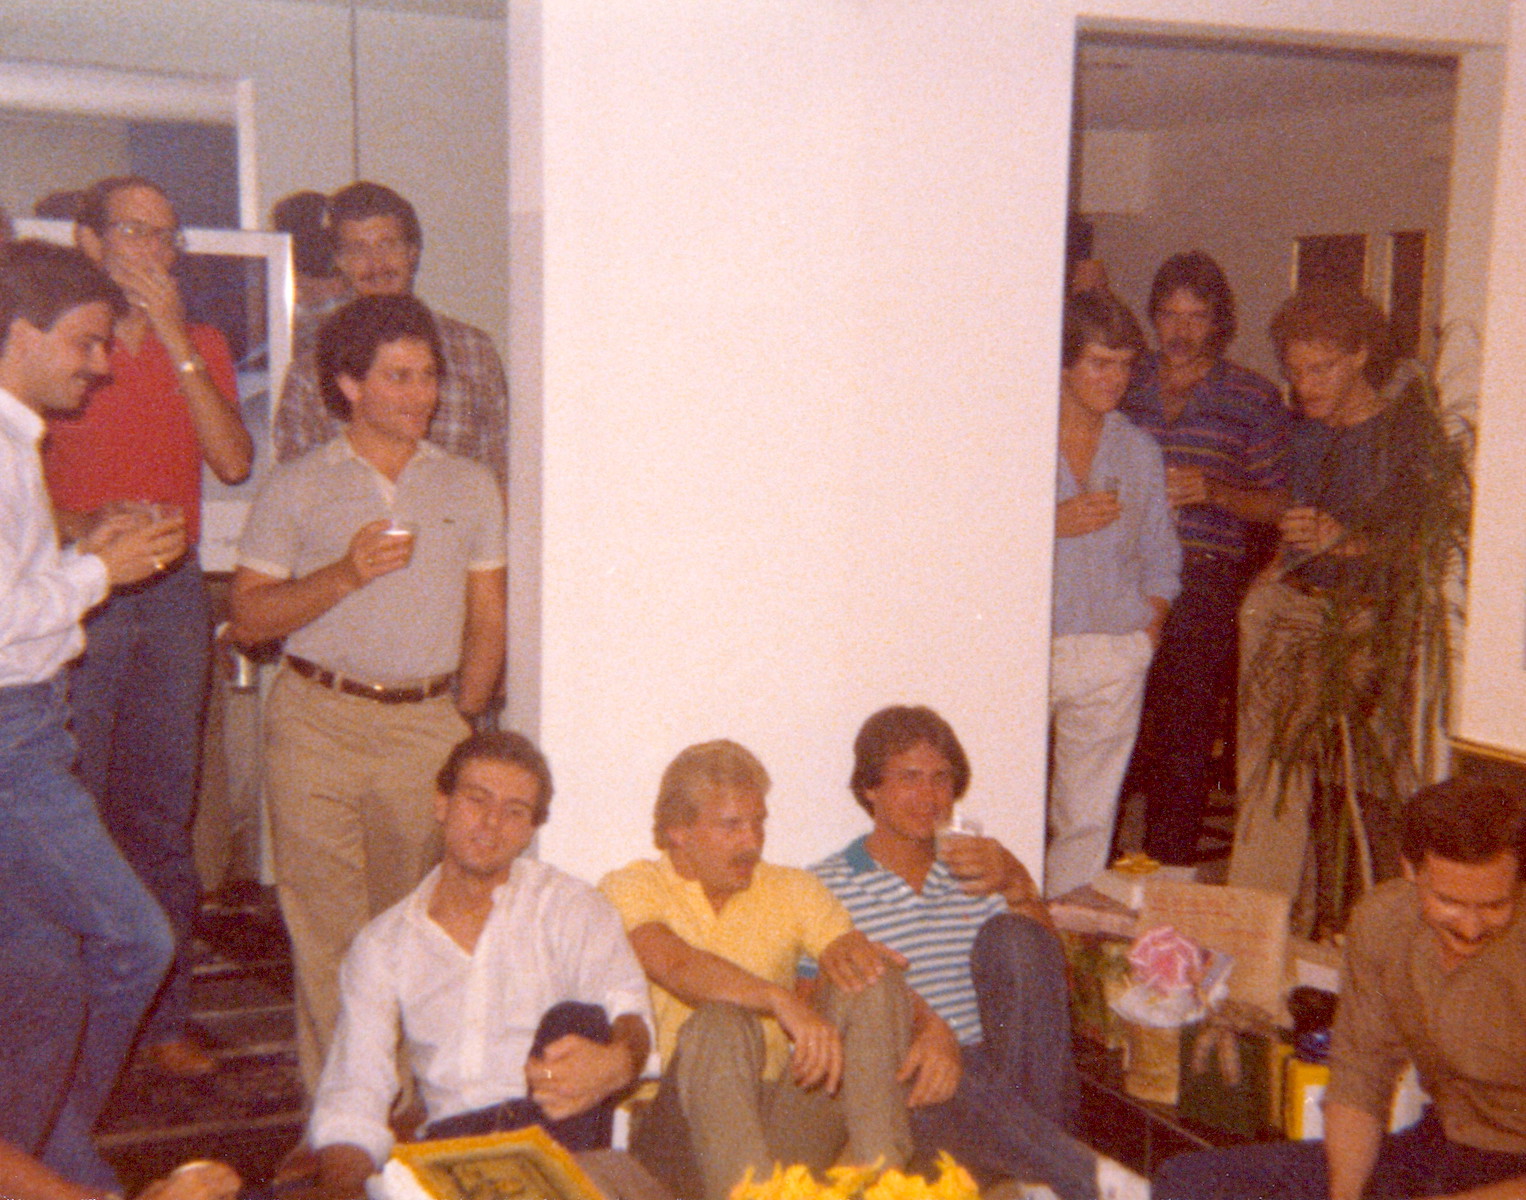 William at his surprise birthday party thrown by his friends, Dallas, TX, circa 1979. William shares, “unfortunately, very few people in this photo survived AIDS.” Photo courtesy of William Waybourn. 